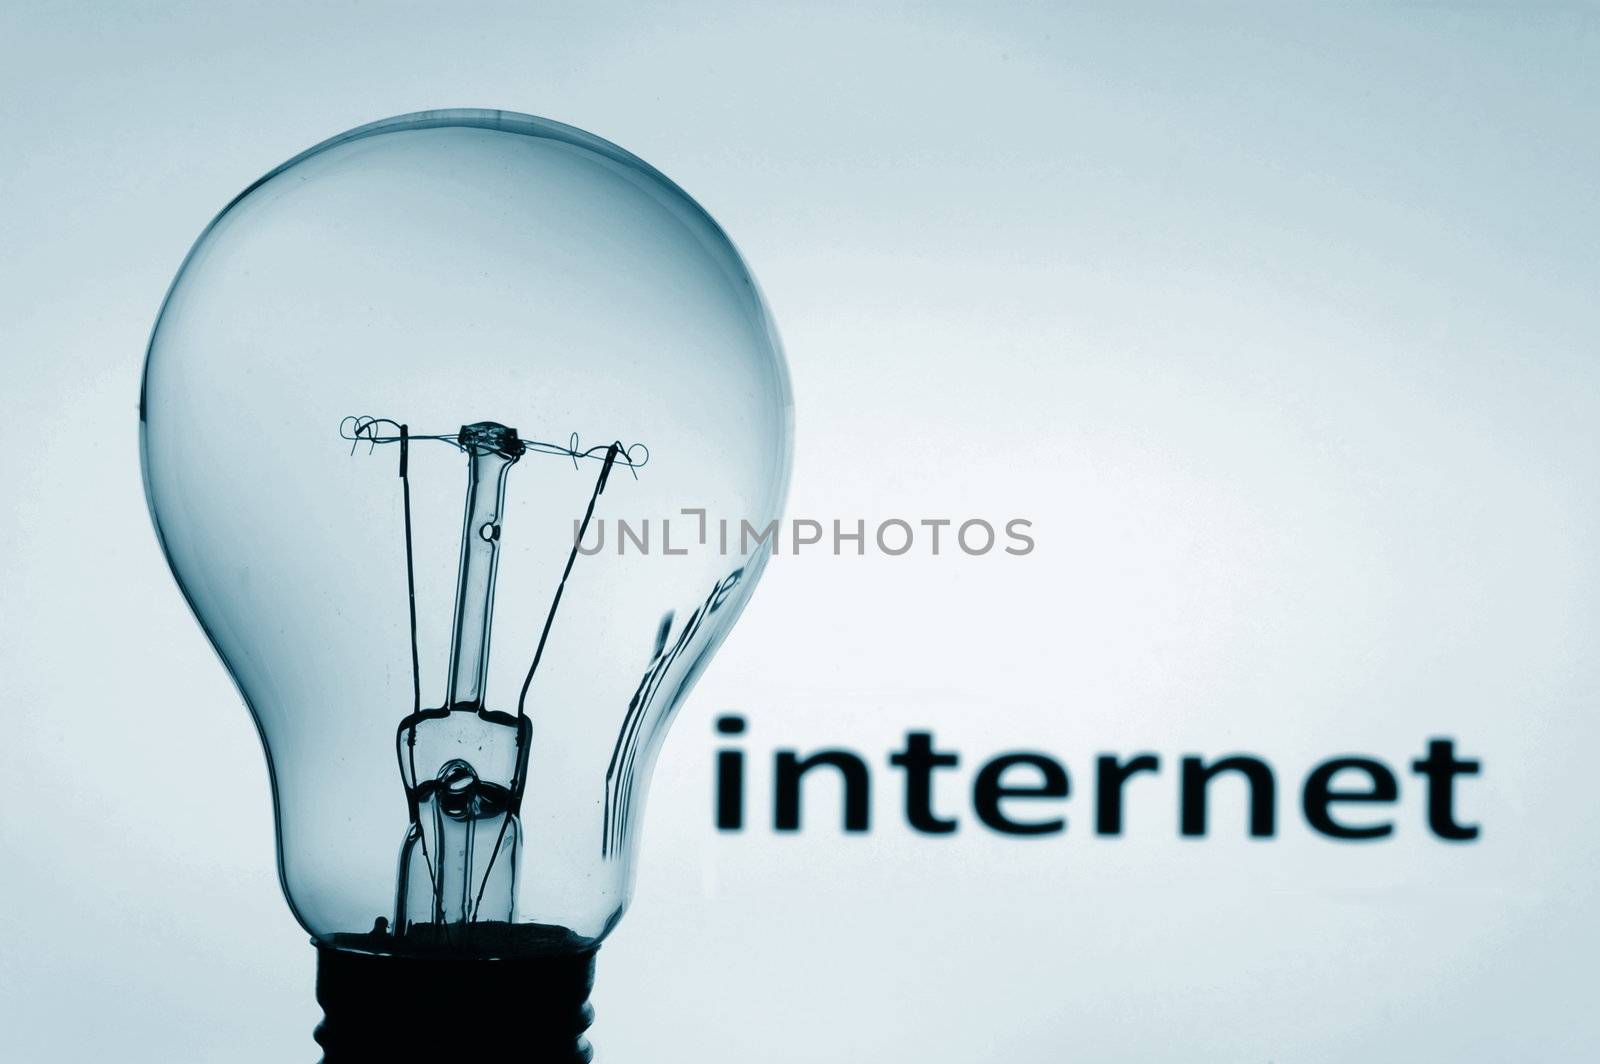 bulb on blue background showing concept of internet communication